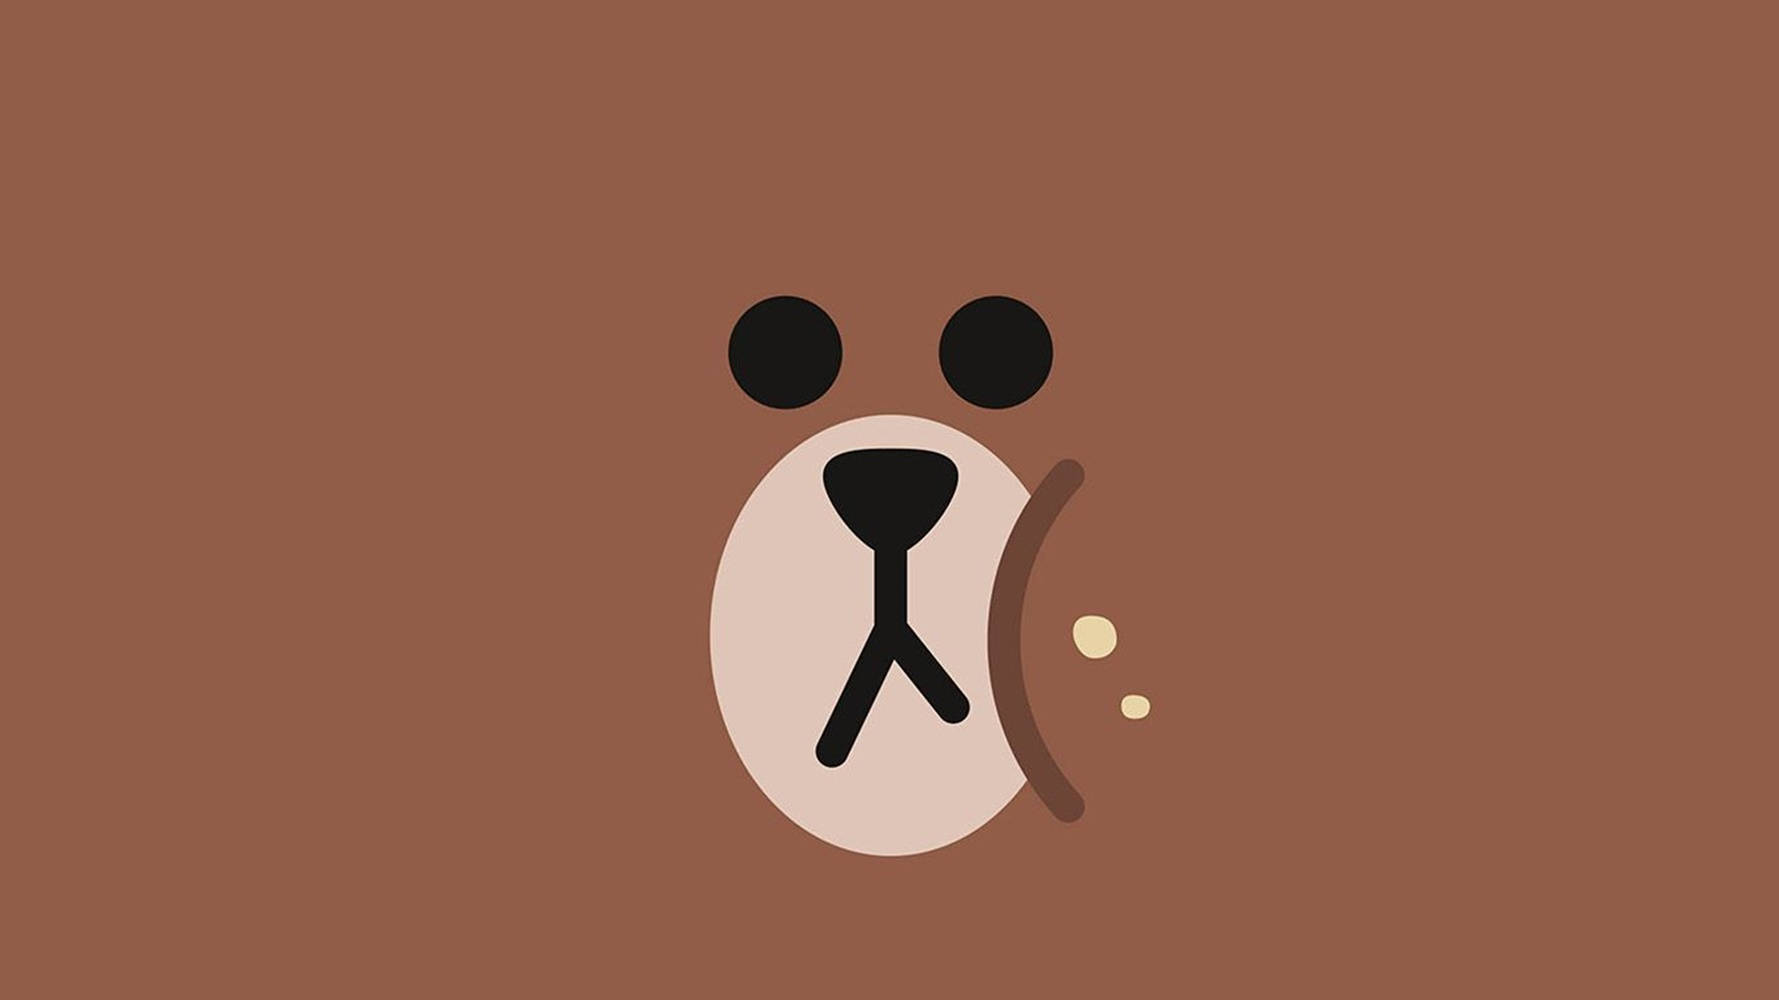 Brown Aesthetic Teddy Bear's Face Laptop Background